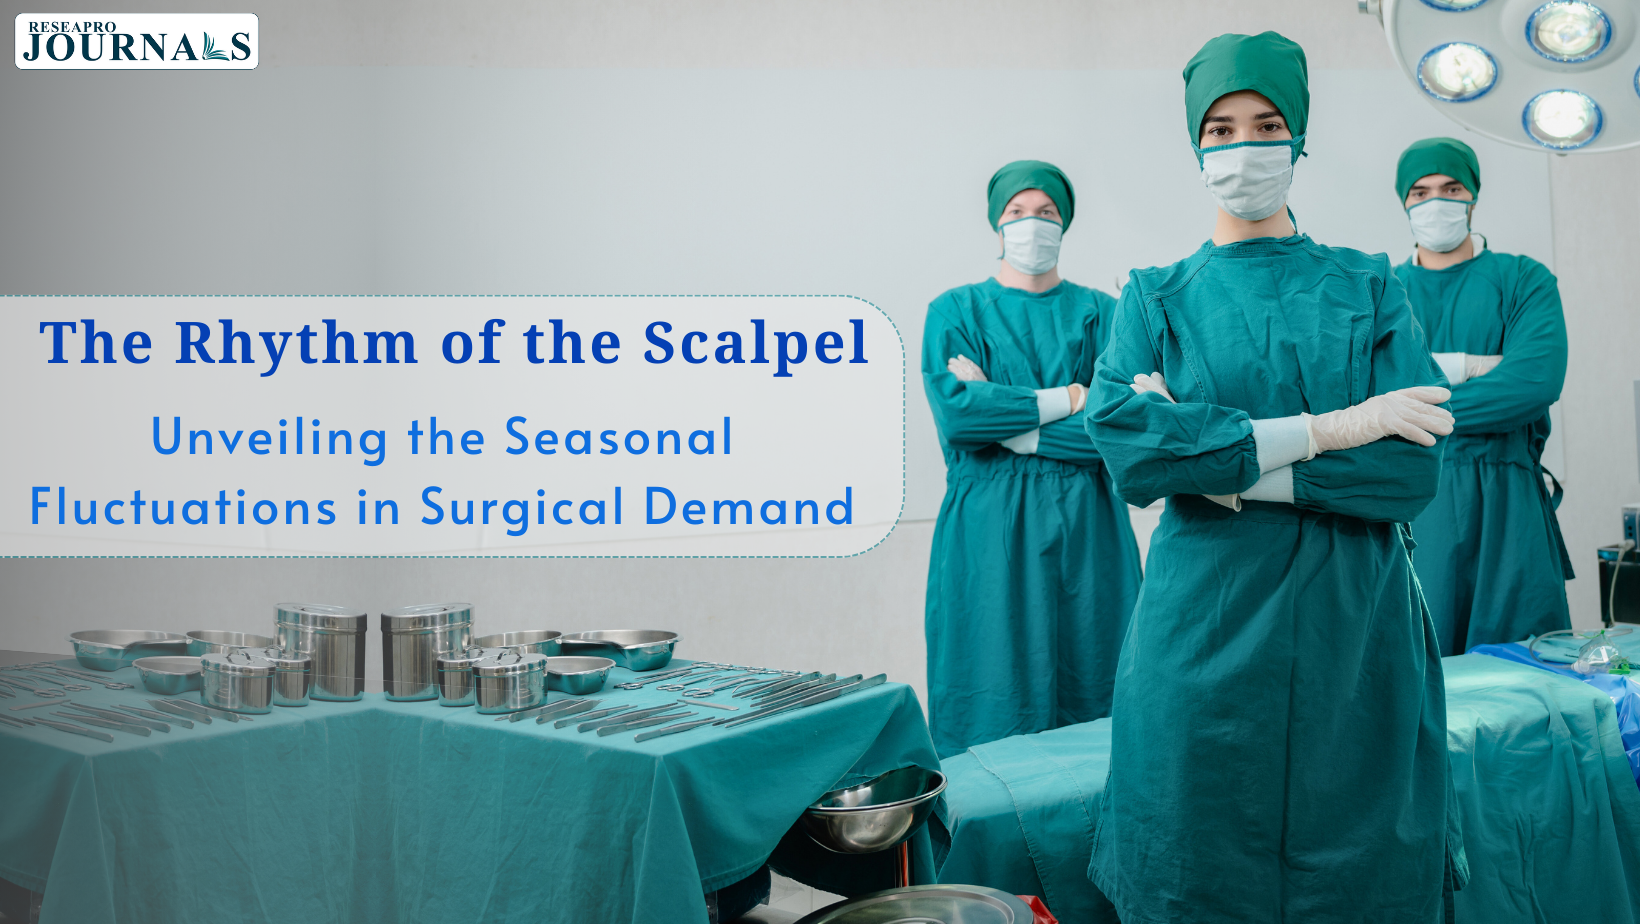 The Rhythm of the Scalpel: Unveiling the Seasonal Fluctuations in Surgical Demand